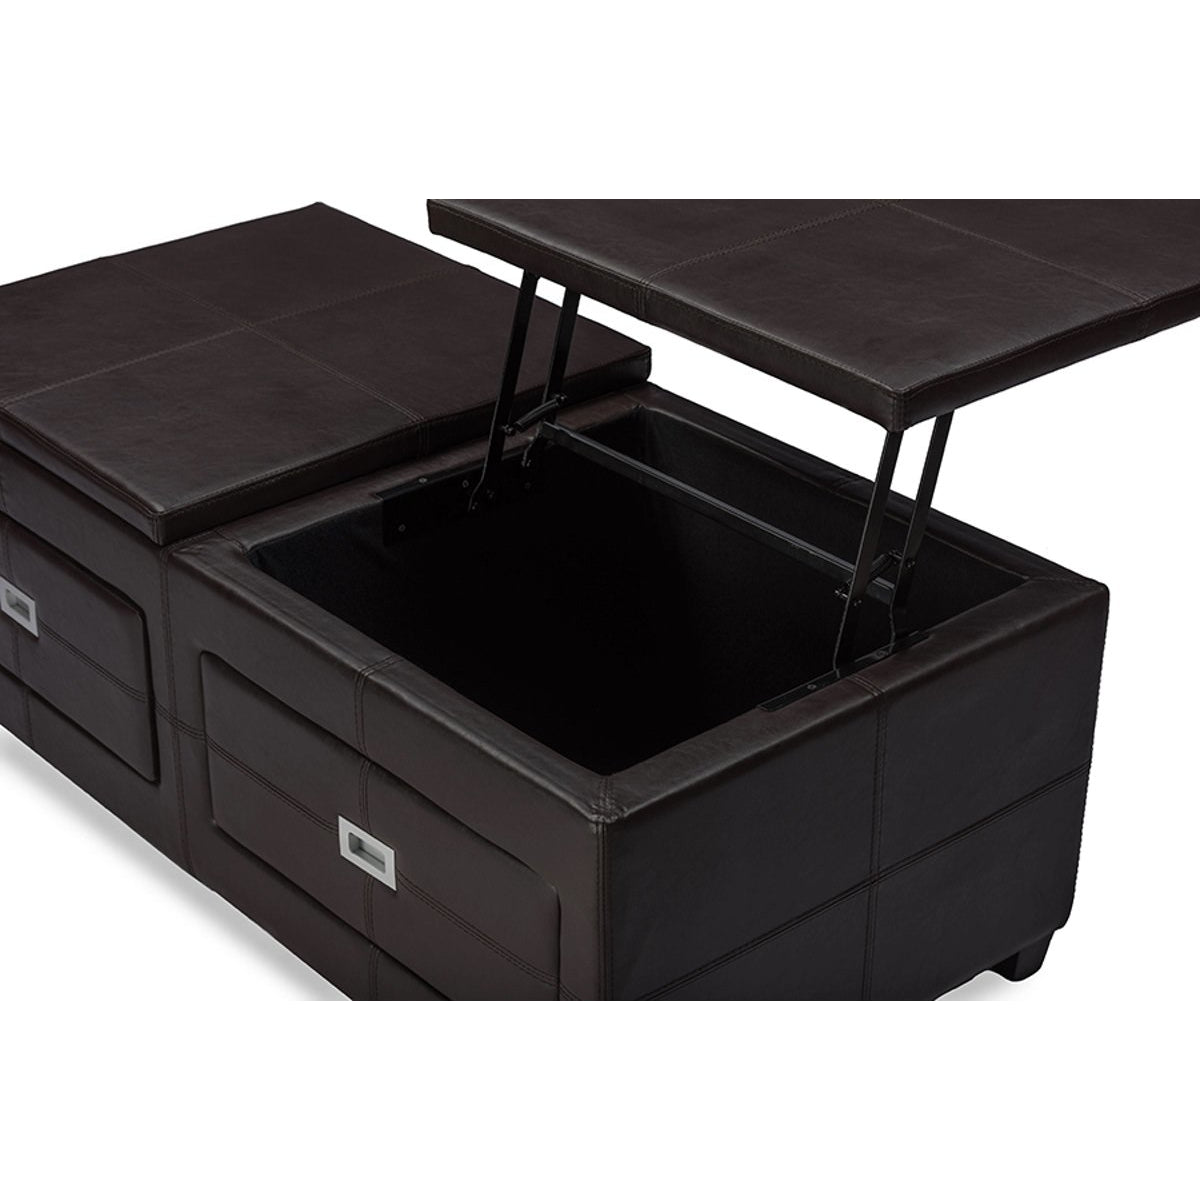 Baxton Studio Indy Modern and Contemporary Functional Lift-top Cocktail Ottoman Table with Storage Drawers and Tray Baxton Studio-coffee tables-Minimal And Modern - 4